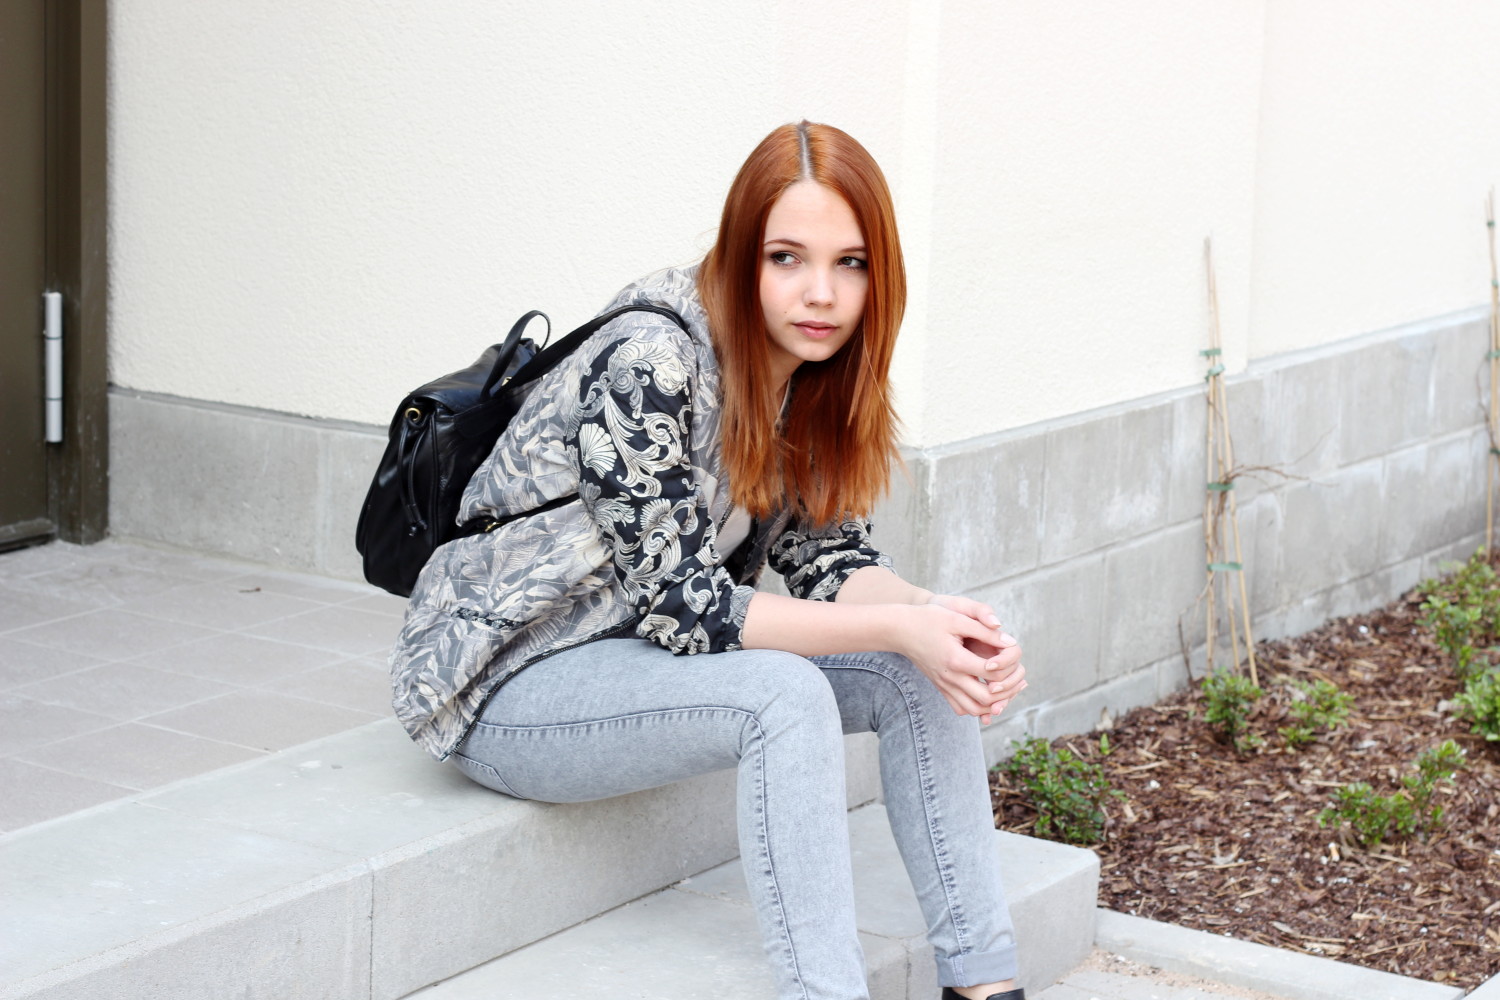 bezaubernde nana, fashionblog, germany, outfit, streetstyle, h&m floral print jacket blouson, gray skinny jeans jeggings h&m, white basic t shirt h&m, black bag backpack, black cut out boots new look